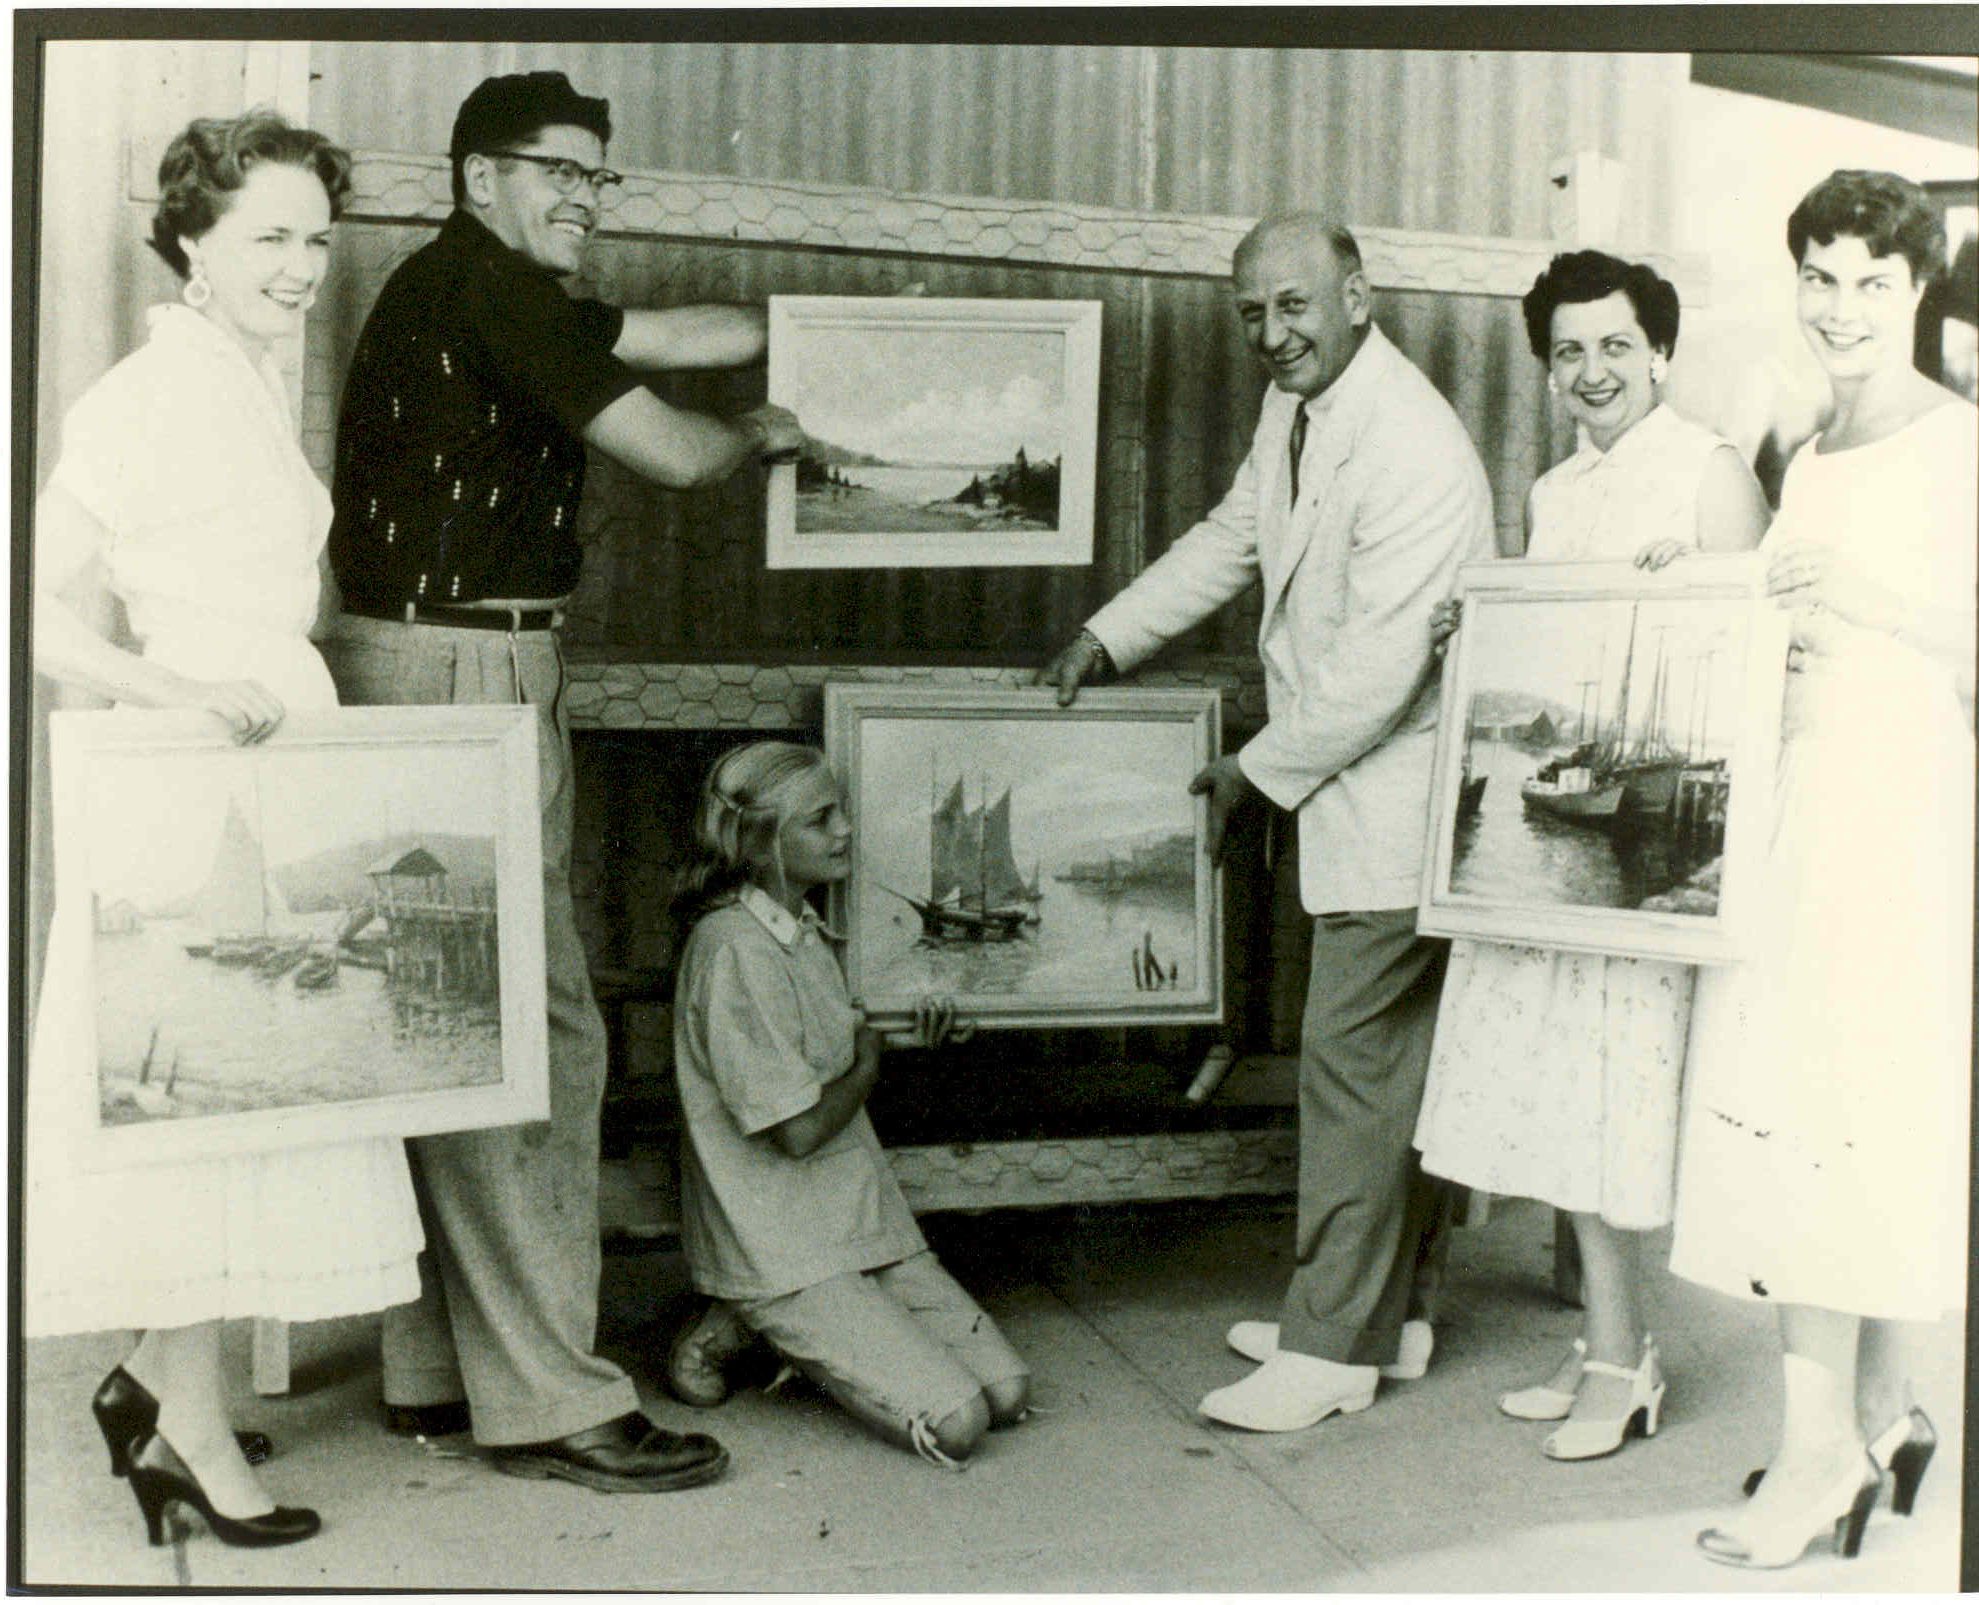 Historical image of people holding framed paintings at early Artsfair.